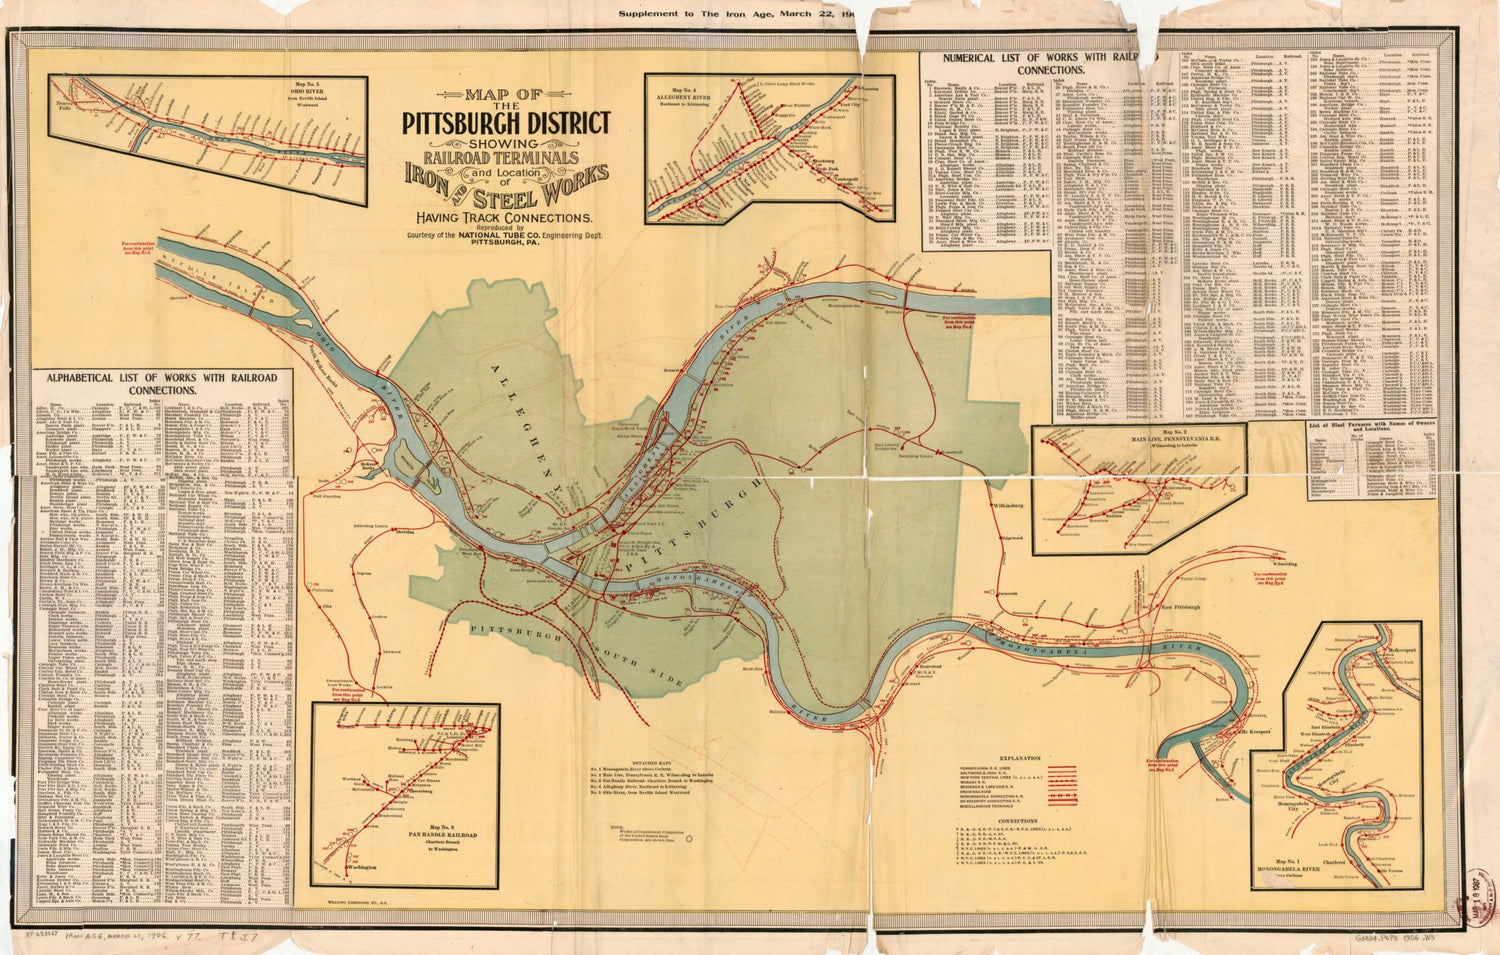 This old map of Map of the Pittsburgh District Showing Railroad Terminals and Location of Iron and Steel Works Having Track Connections from 1906 was created by  National Tube Co. Engineering Department,  Williams Engraving Co in 1906